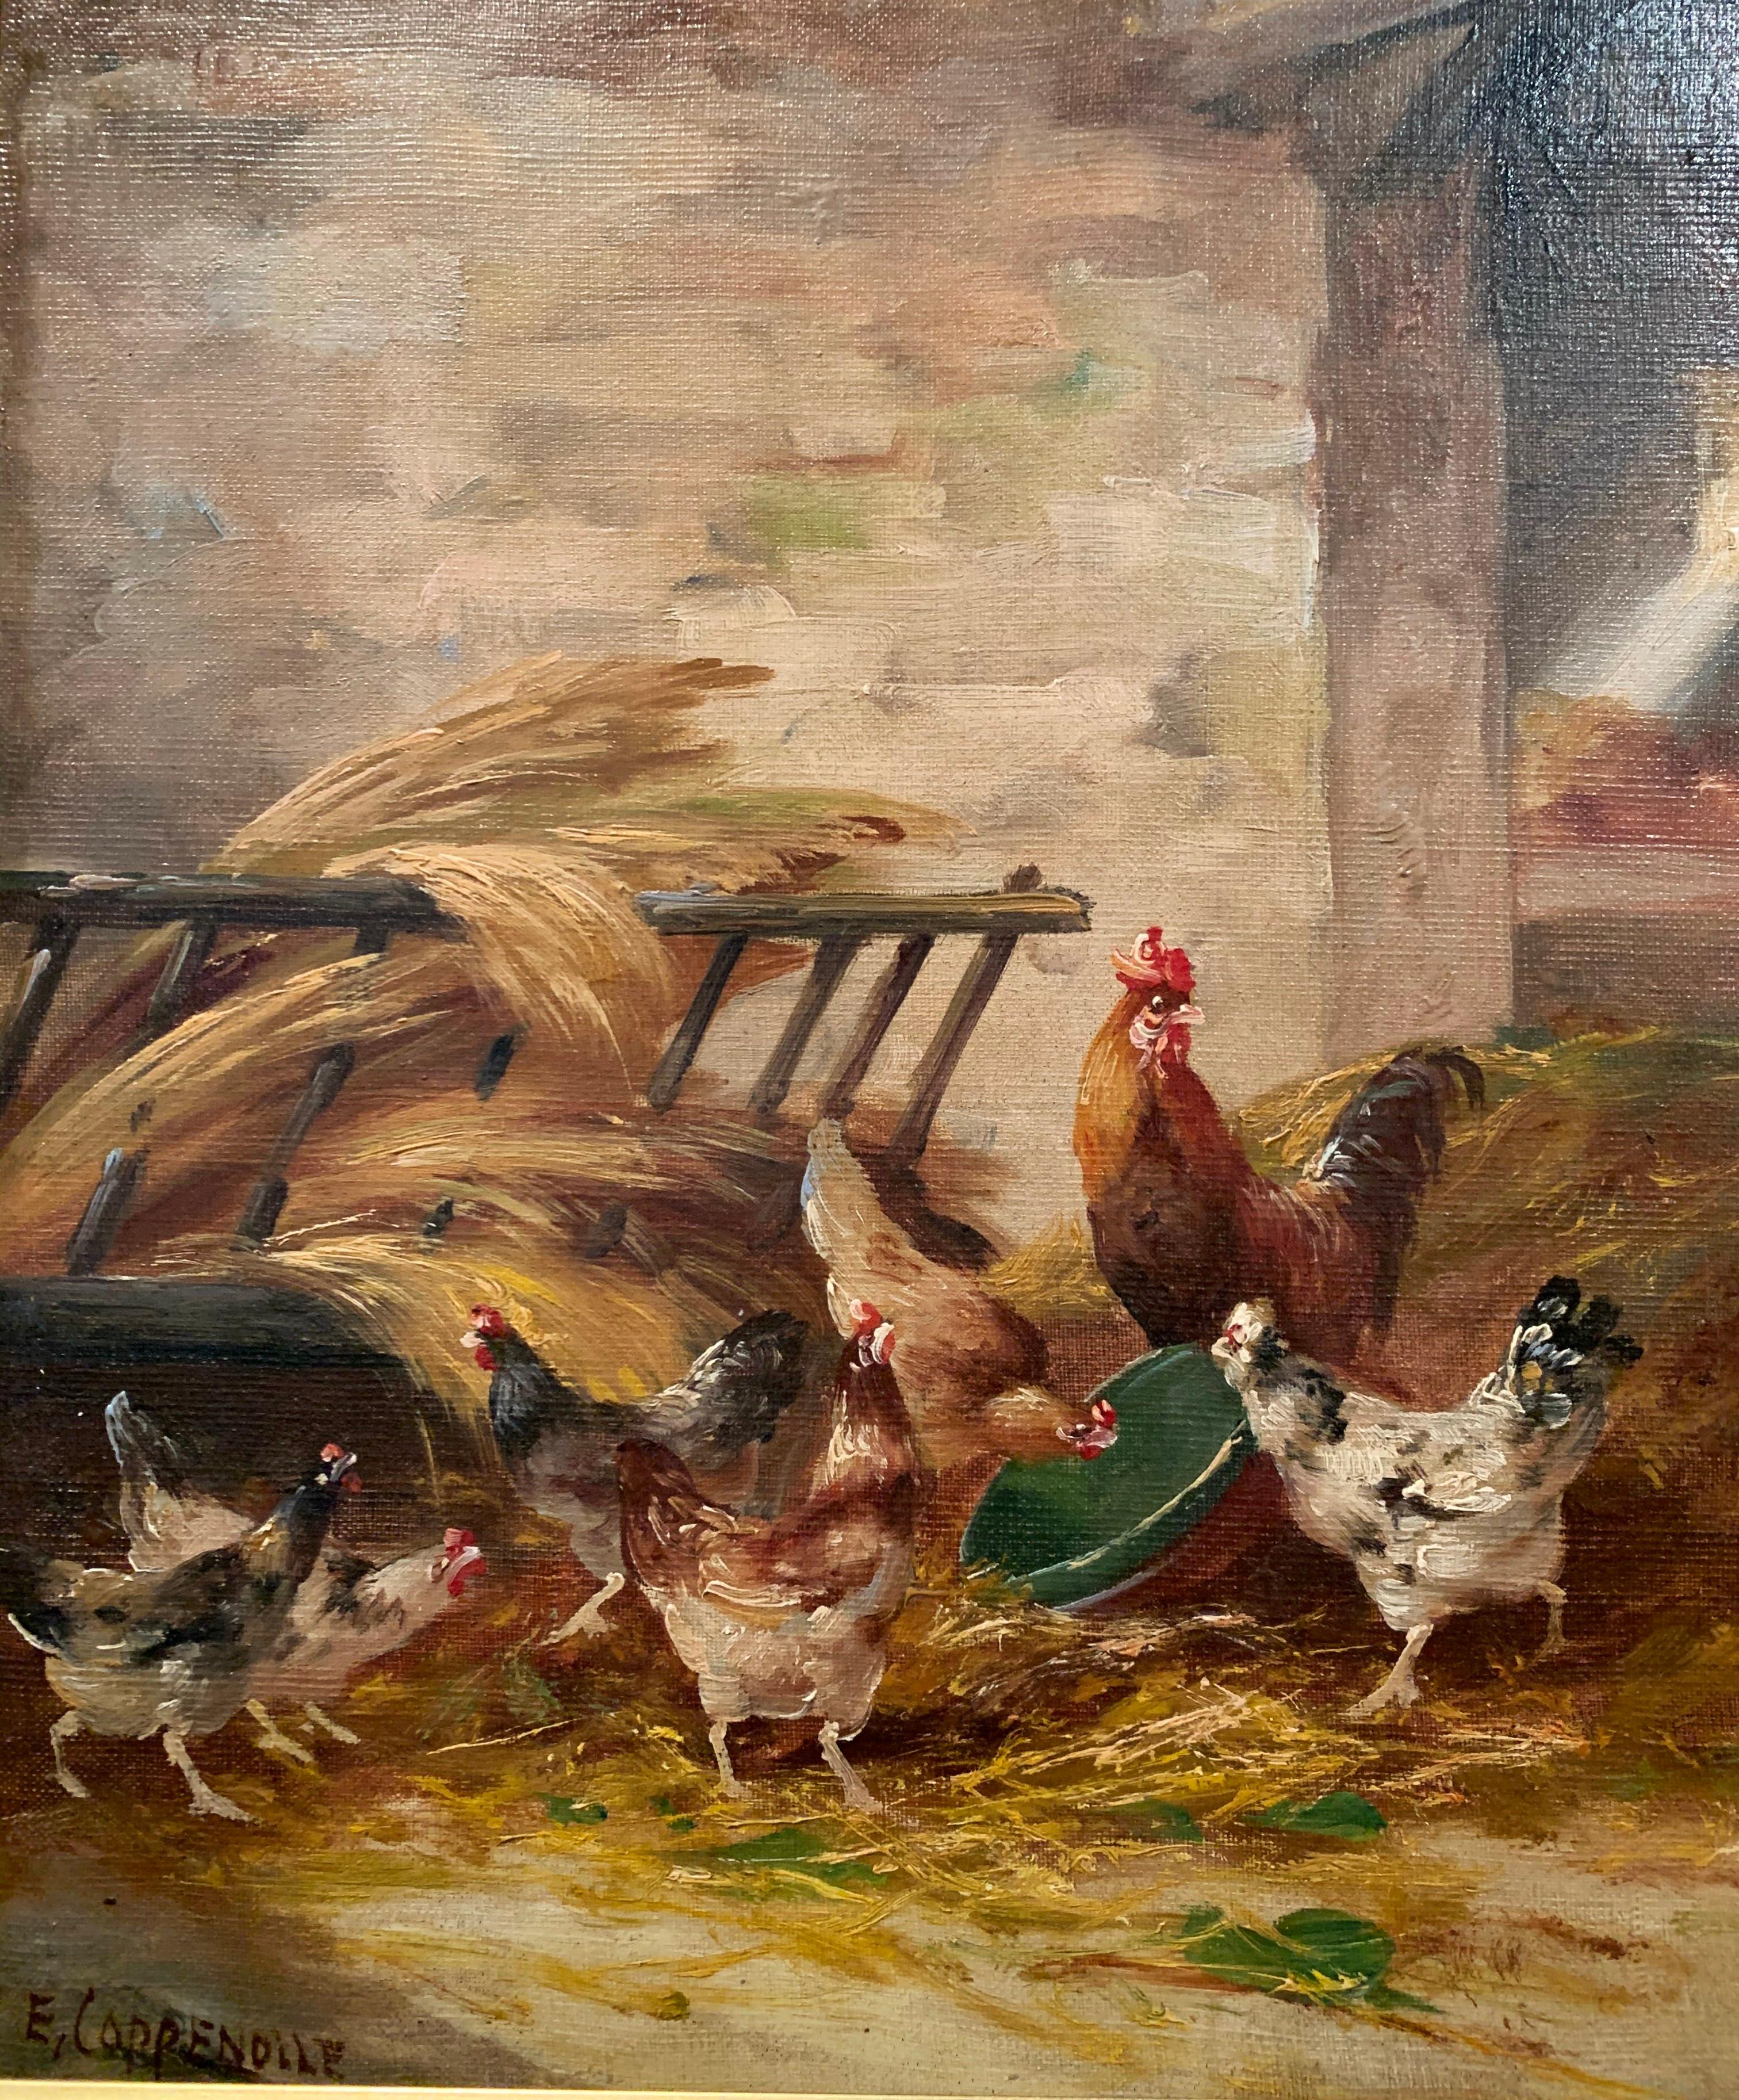 Bring a beauty of the French countryside to your kitchen with this charming, antique farm painting. Set in a carved giltwood frame, the artwork depicts a farm house scene with seven chicken and roosters. The bucolic composition has a warm color